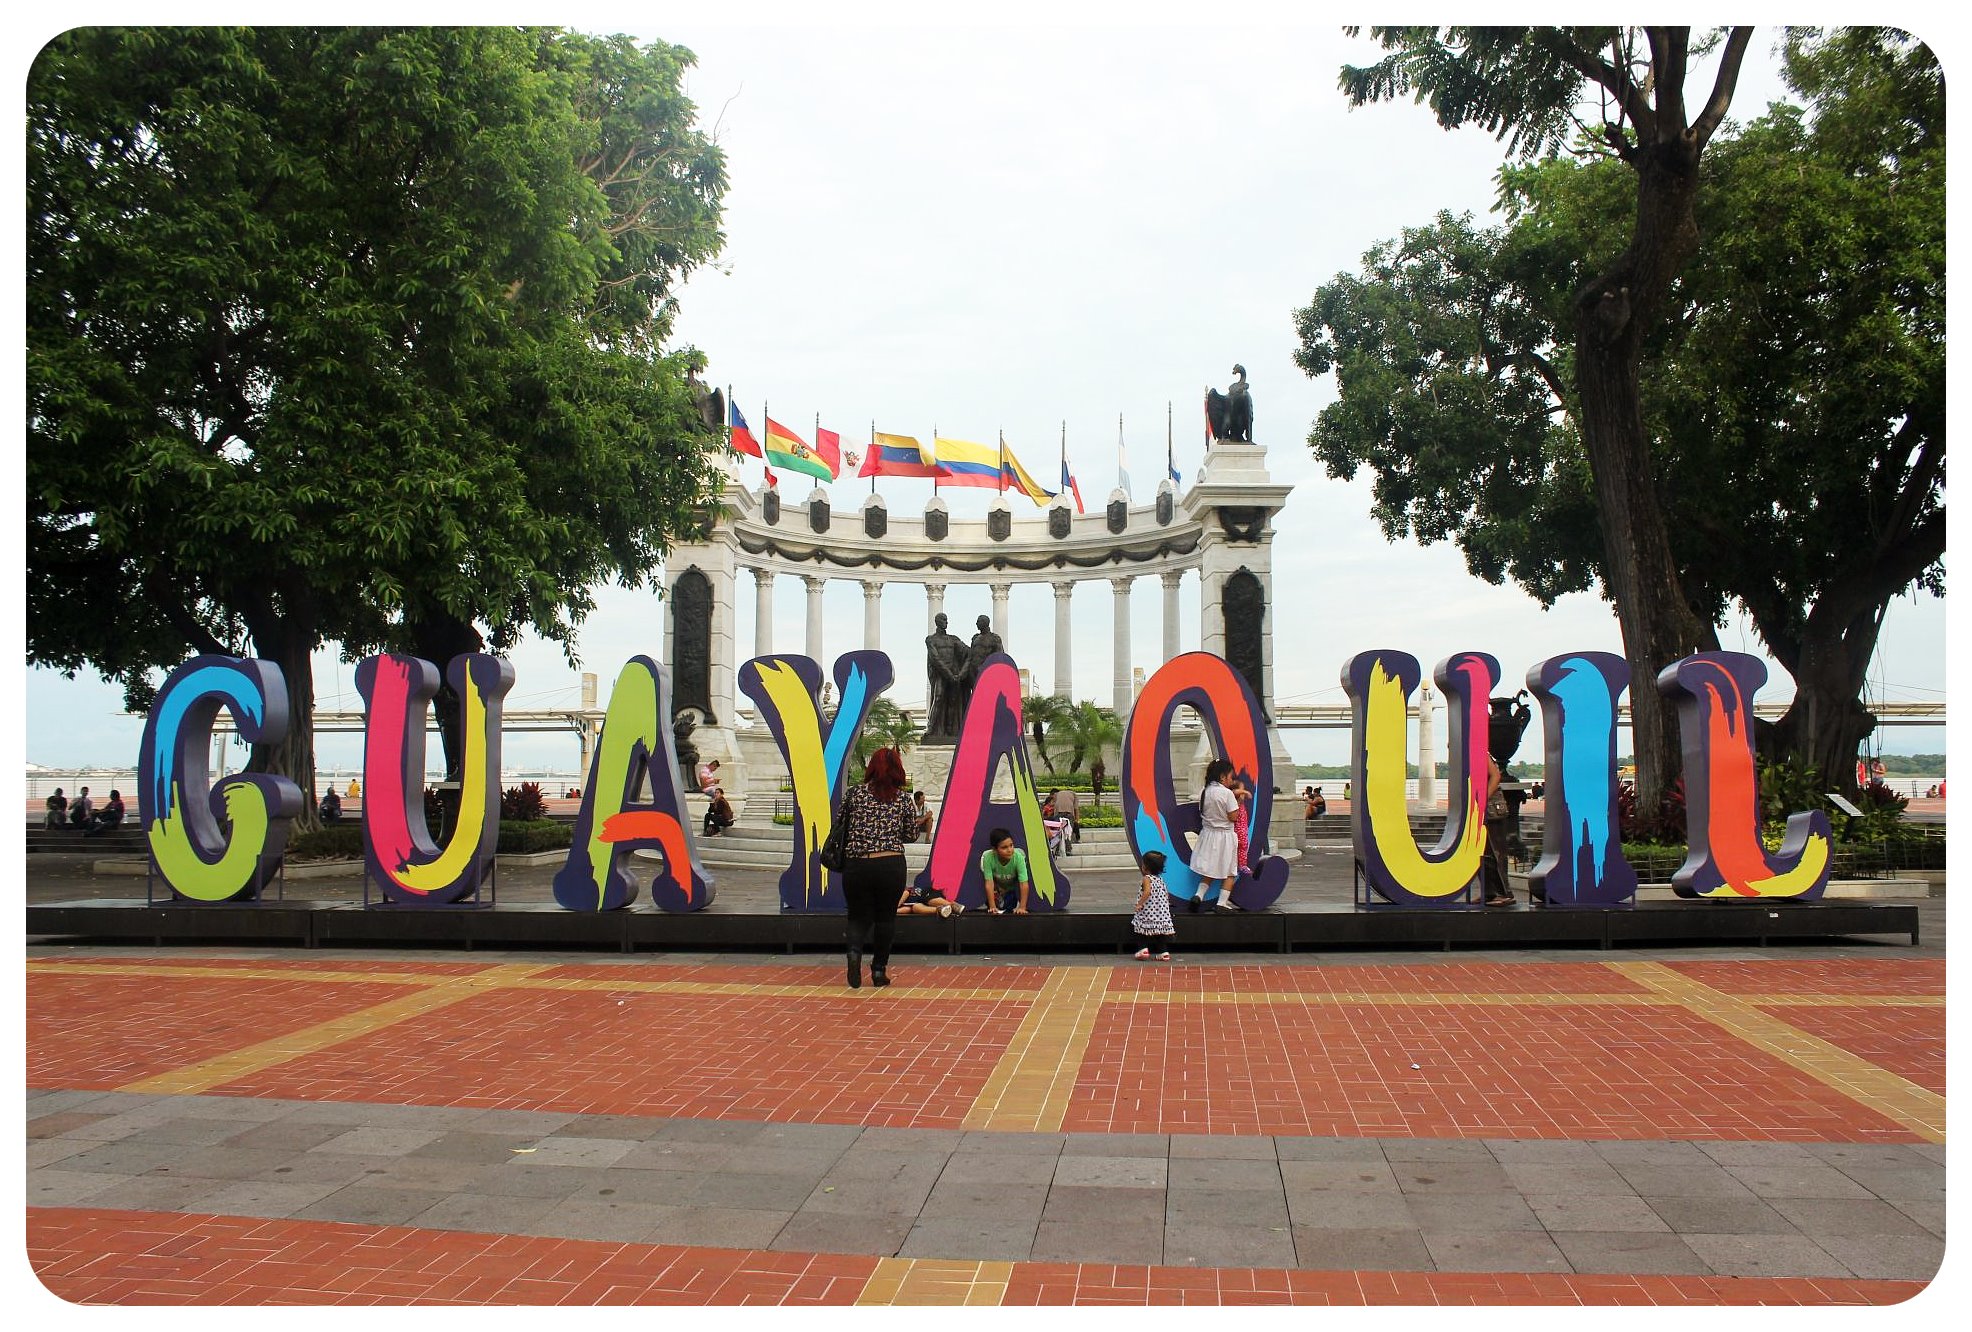 How Iguanas Saved Guayaquil For Me